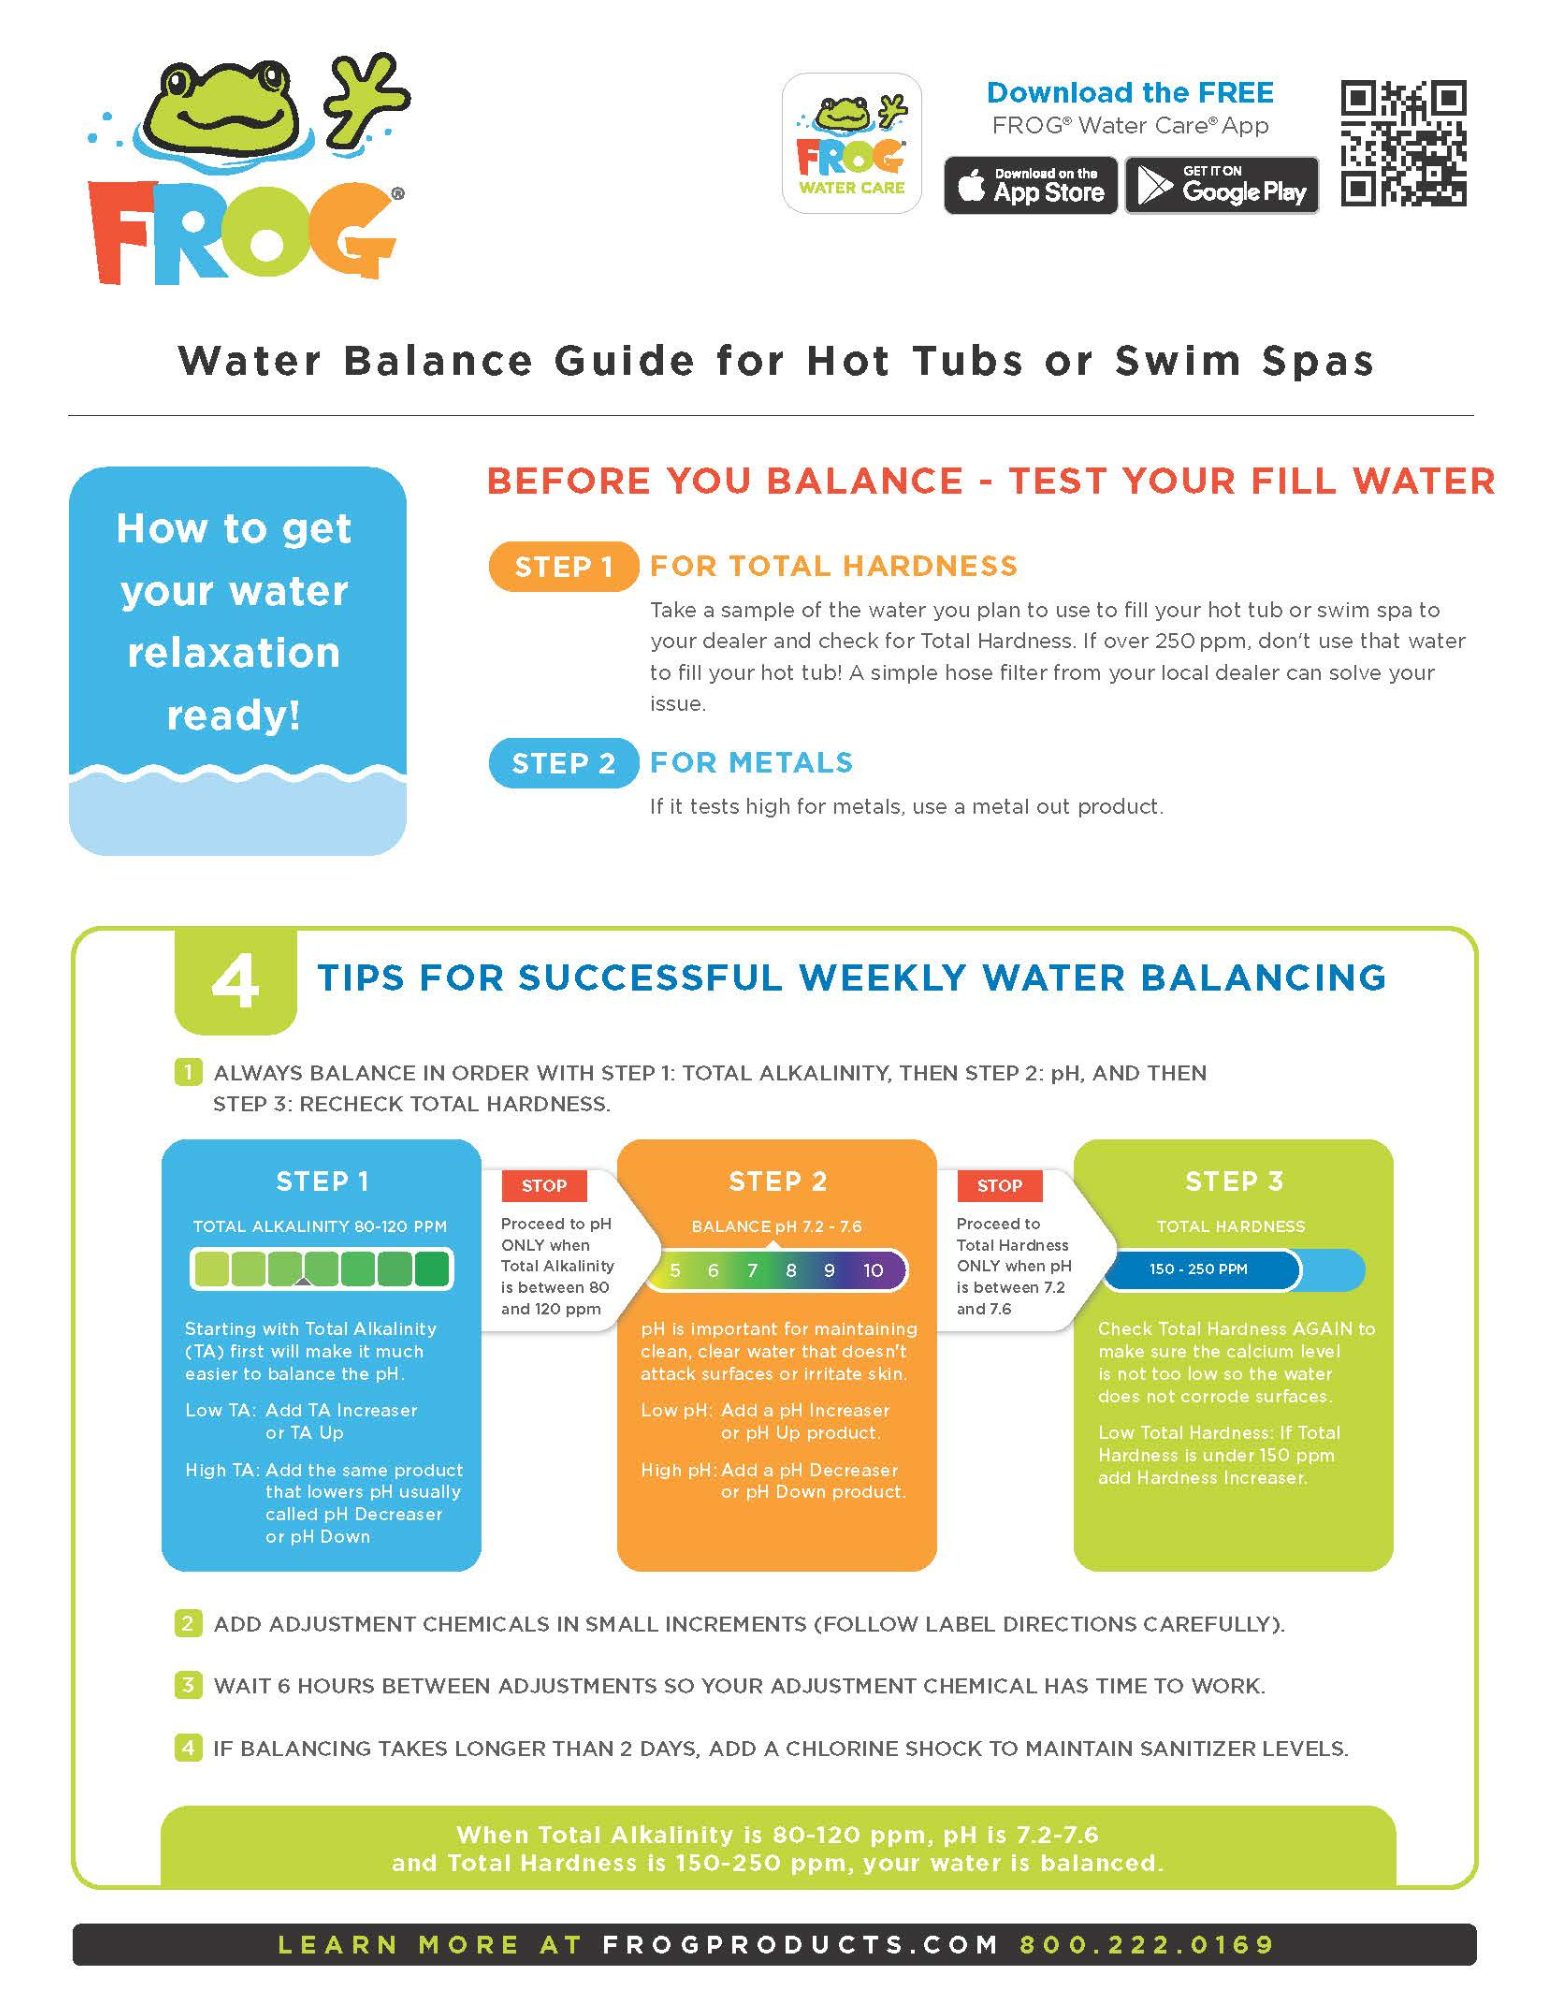 Water Balancing Guide for Hot Tubs or Swim Spas